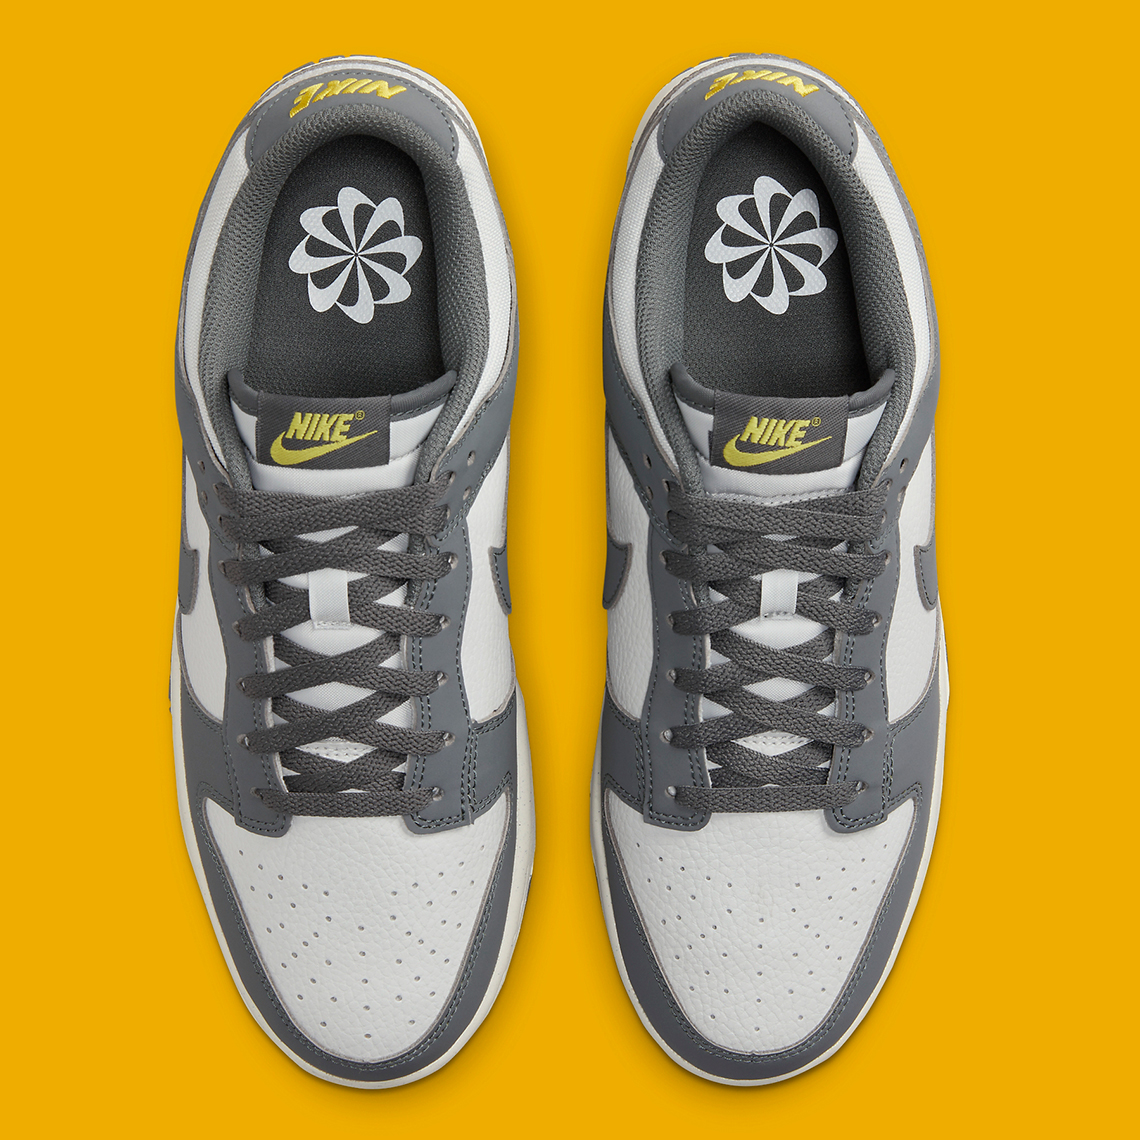 teaser of the x Air Max 90 hybrid Next Nature Grey Yellow Fz4621 001 1